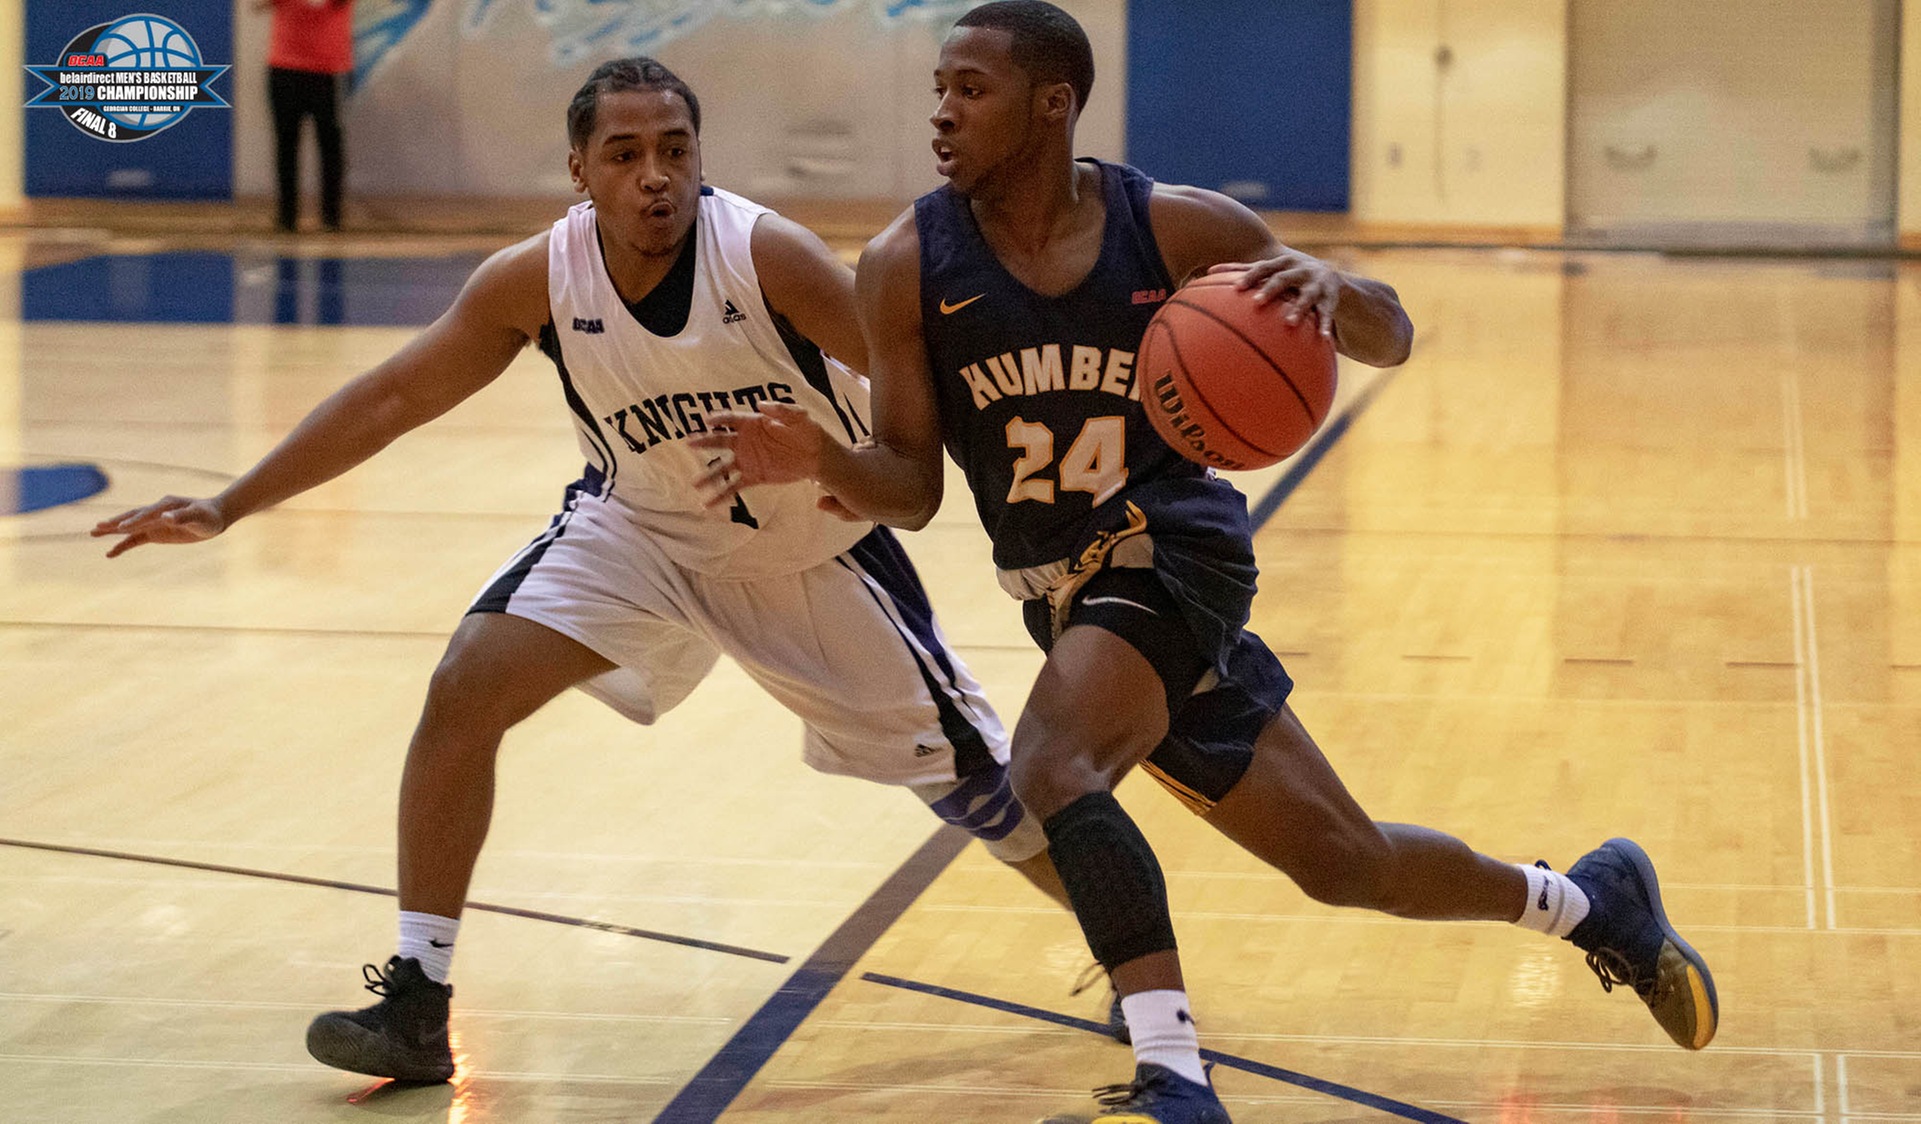 No. 5 HUMBER ADVANCES TO FINALS WITH WIN OVER NIAGARA; EARNS NATIONALS BERTH